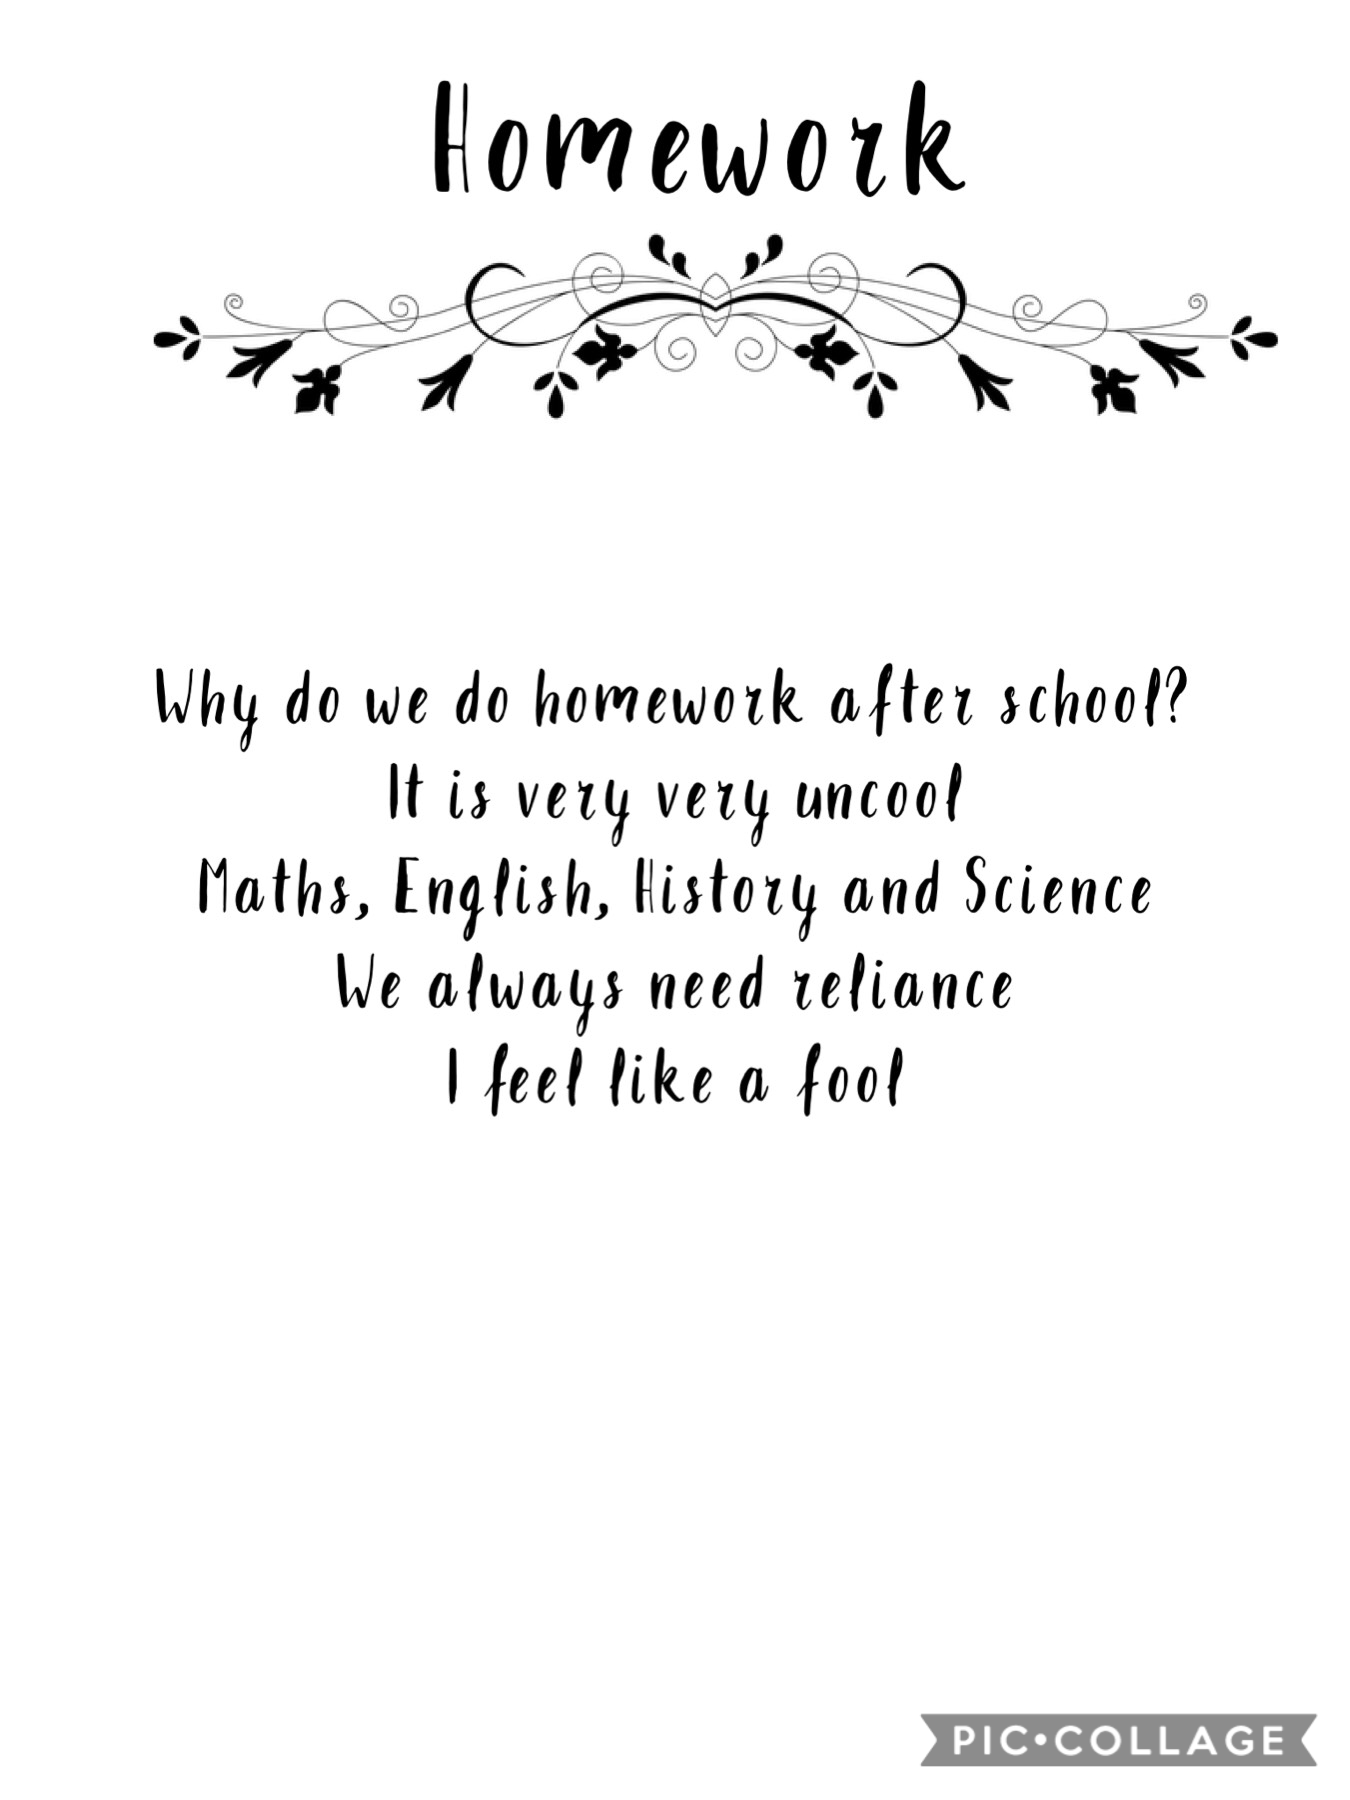 Here is a poem about homework for you guys!!